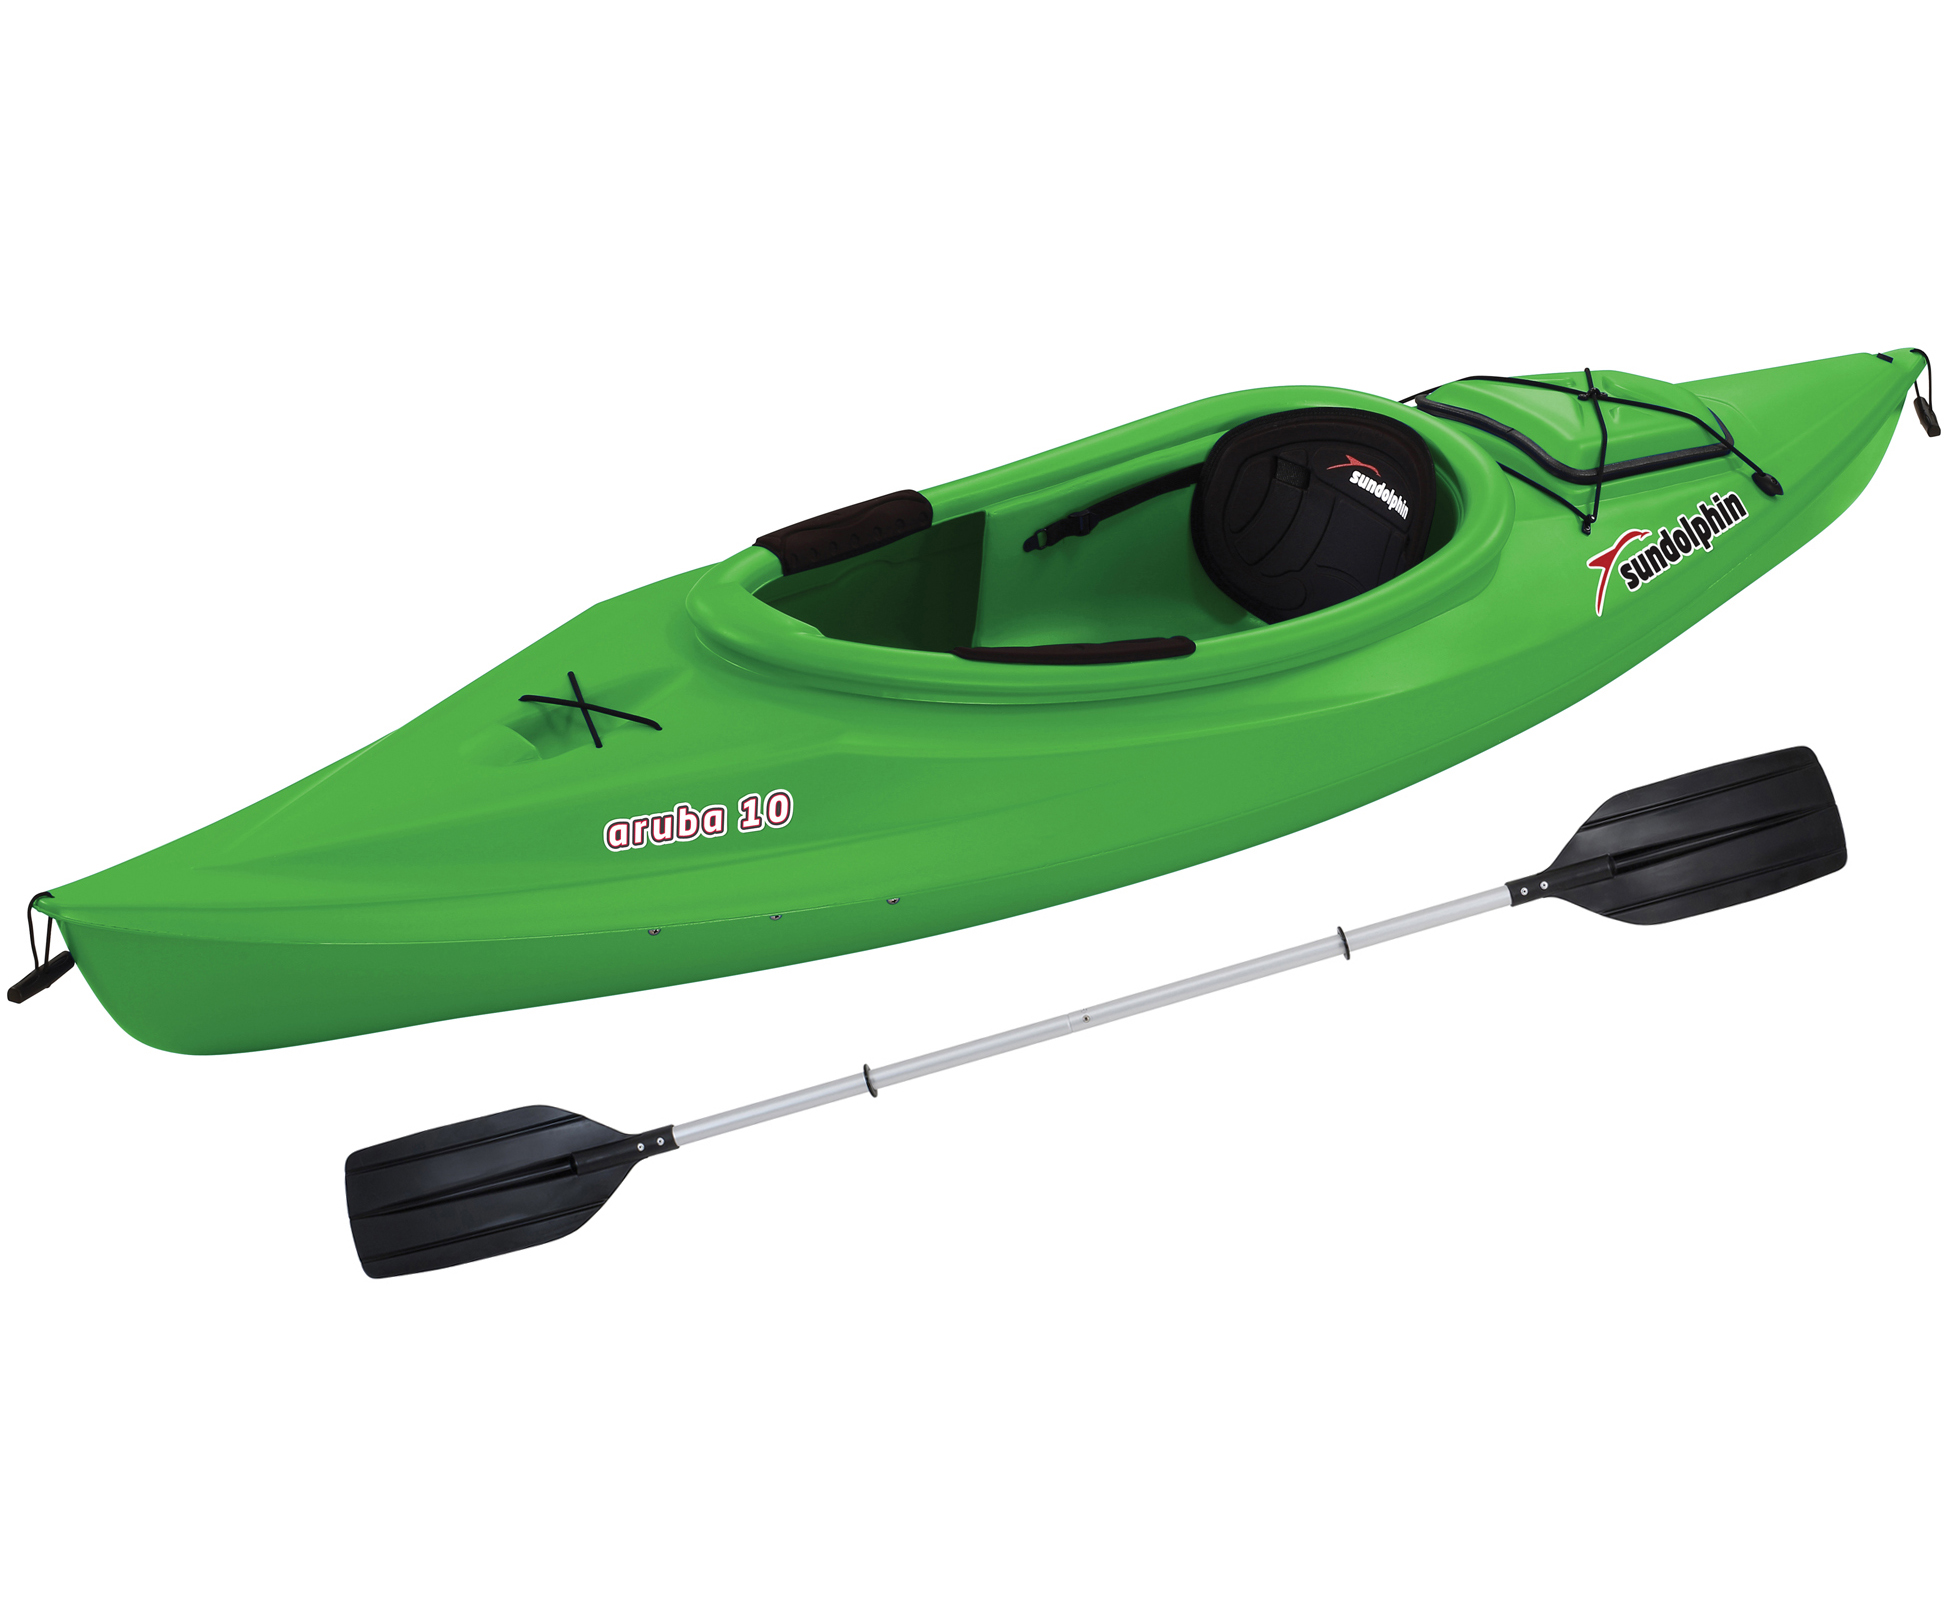 Sun Dolphin Aruba 10' Sit-in Kayak Lime, Paddle Included - image 1 of 5